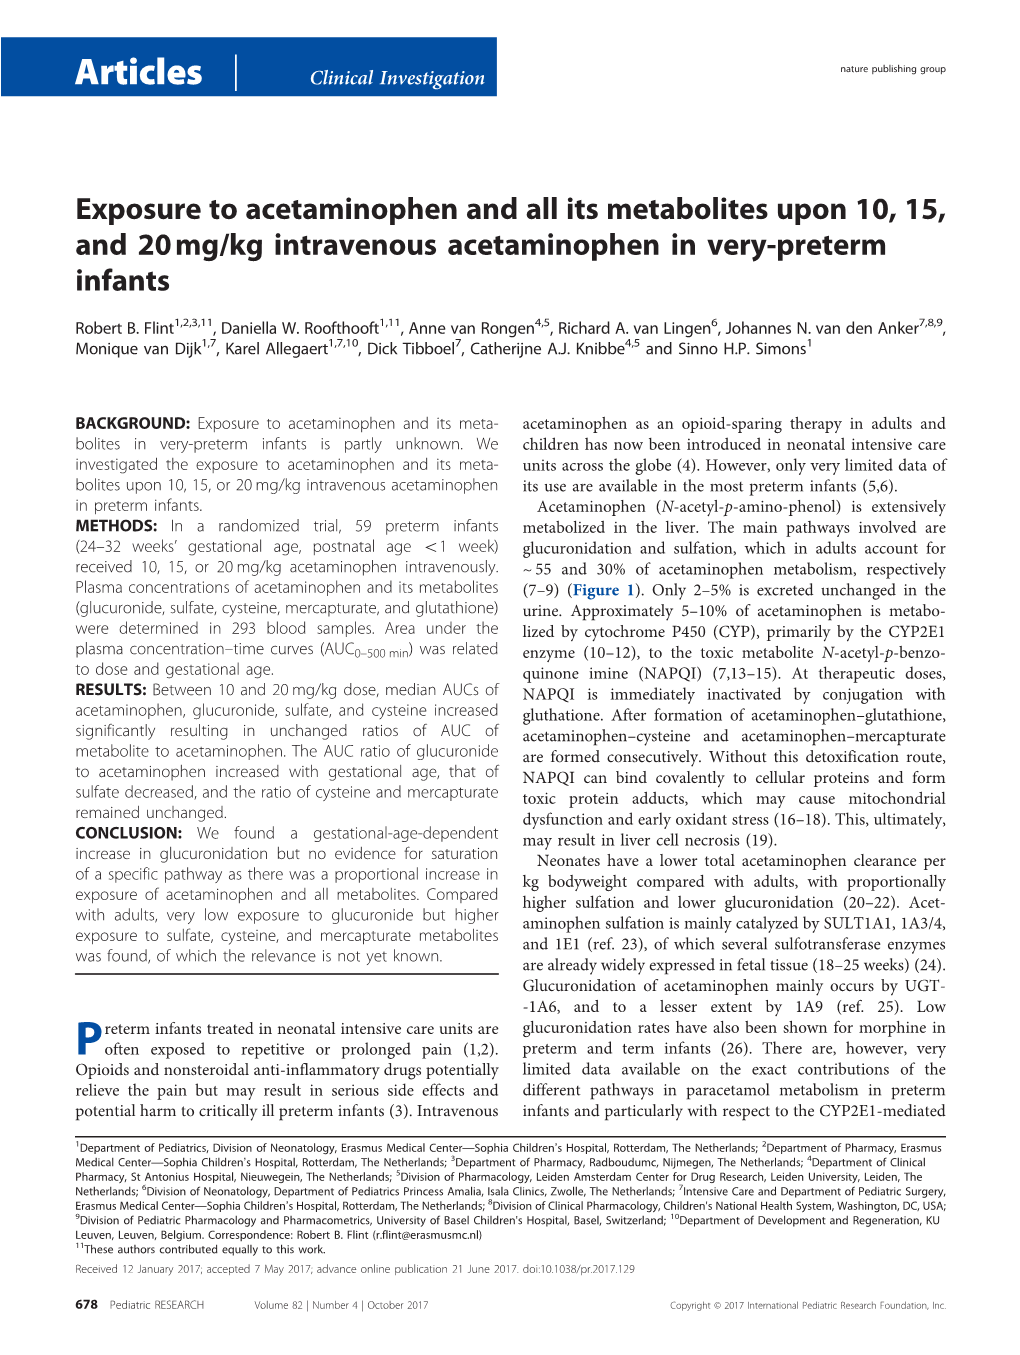 Exposure to Acetaminophen and All Its Metabolites Upon 10, 15, and 20Mg/Kg Intravenous Acetaminophen in Very-Preterm Infants